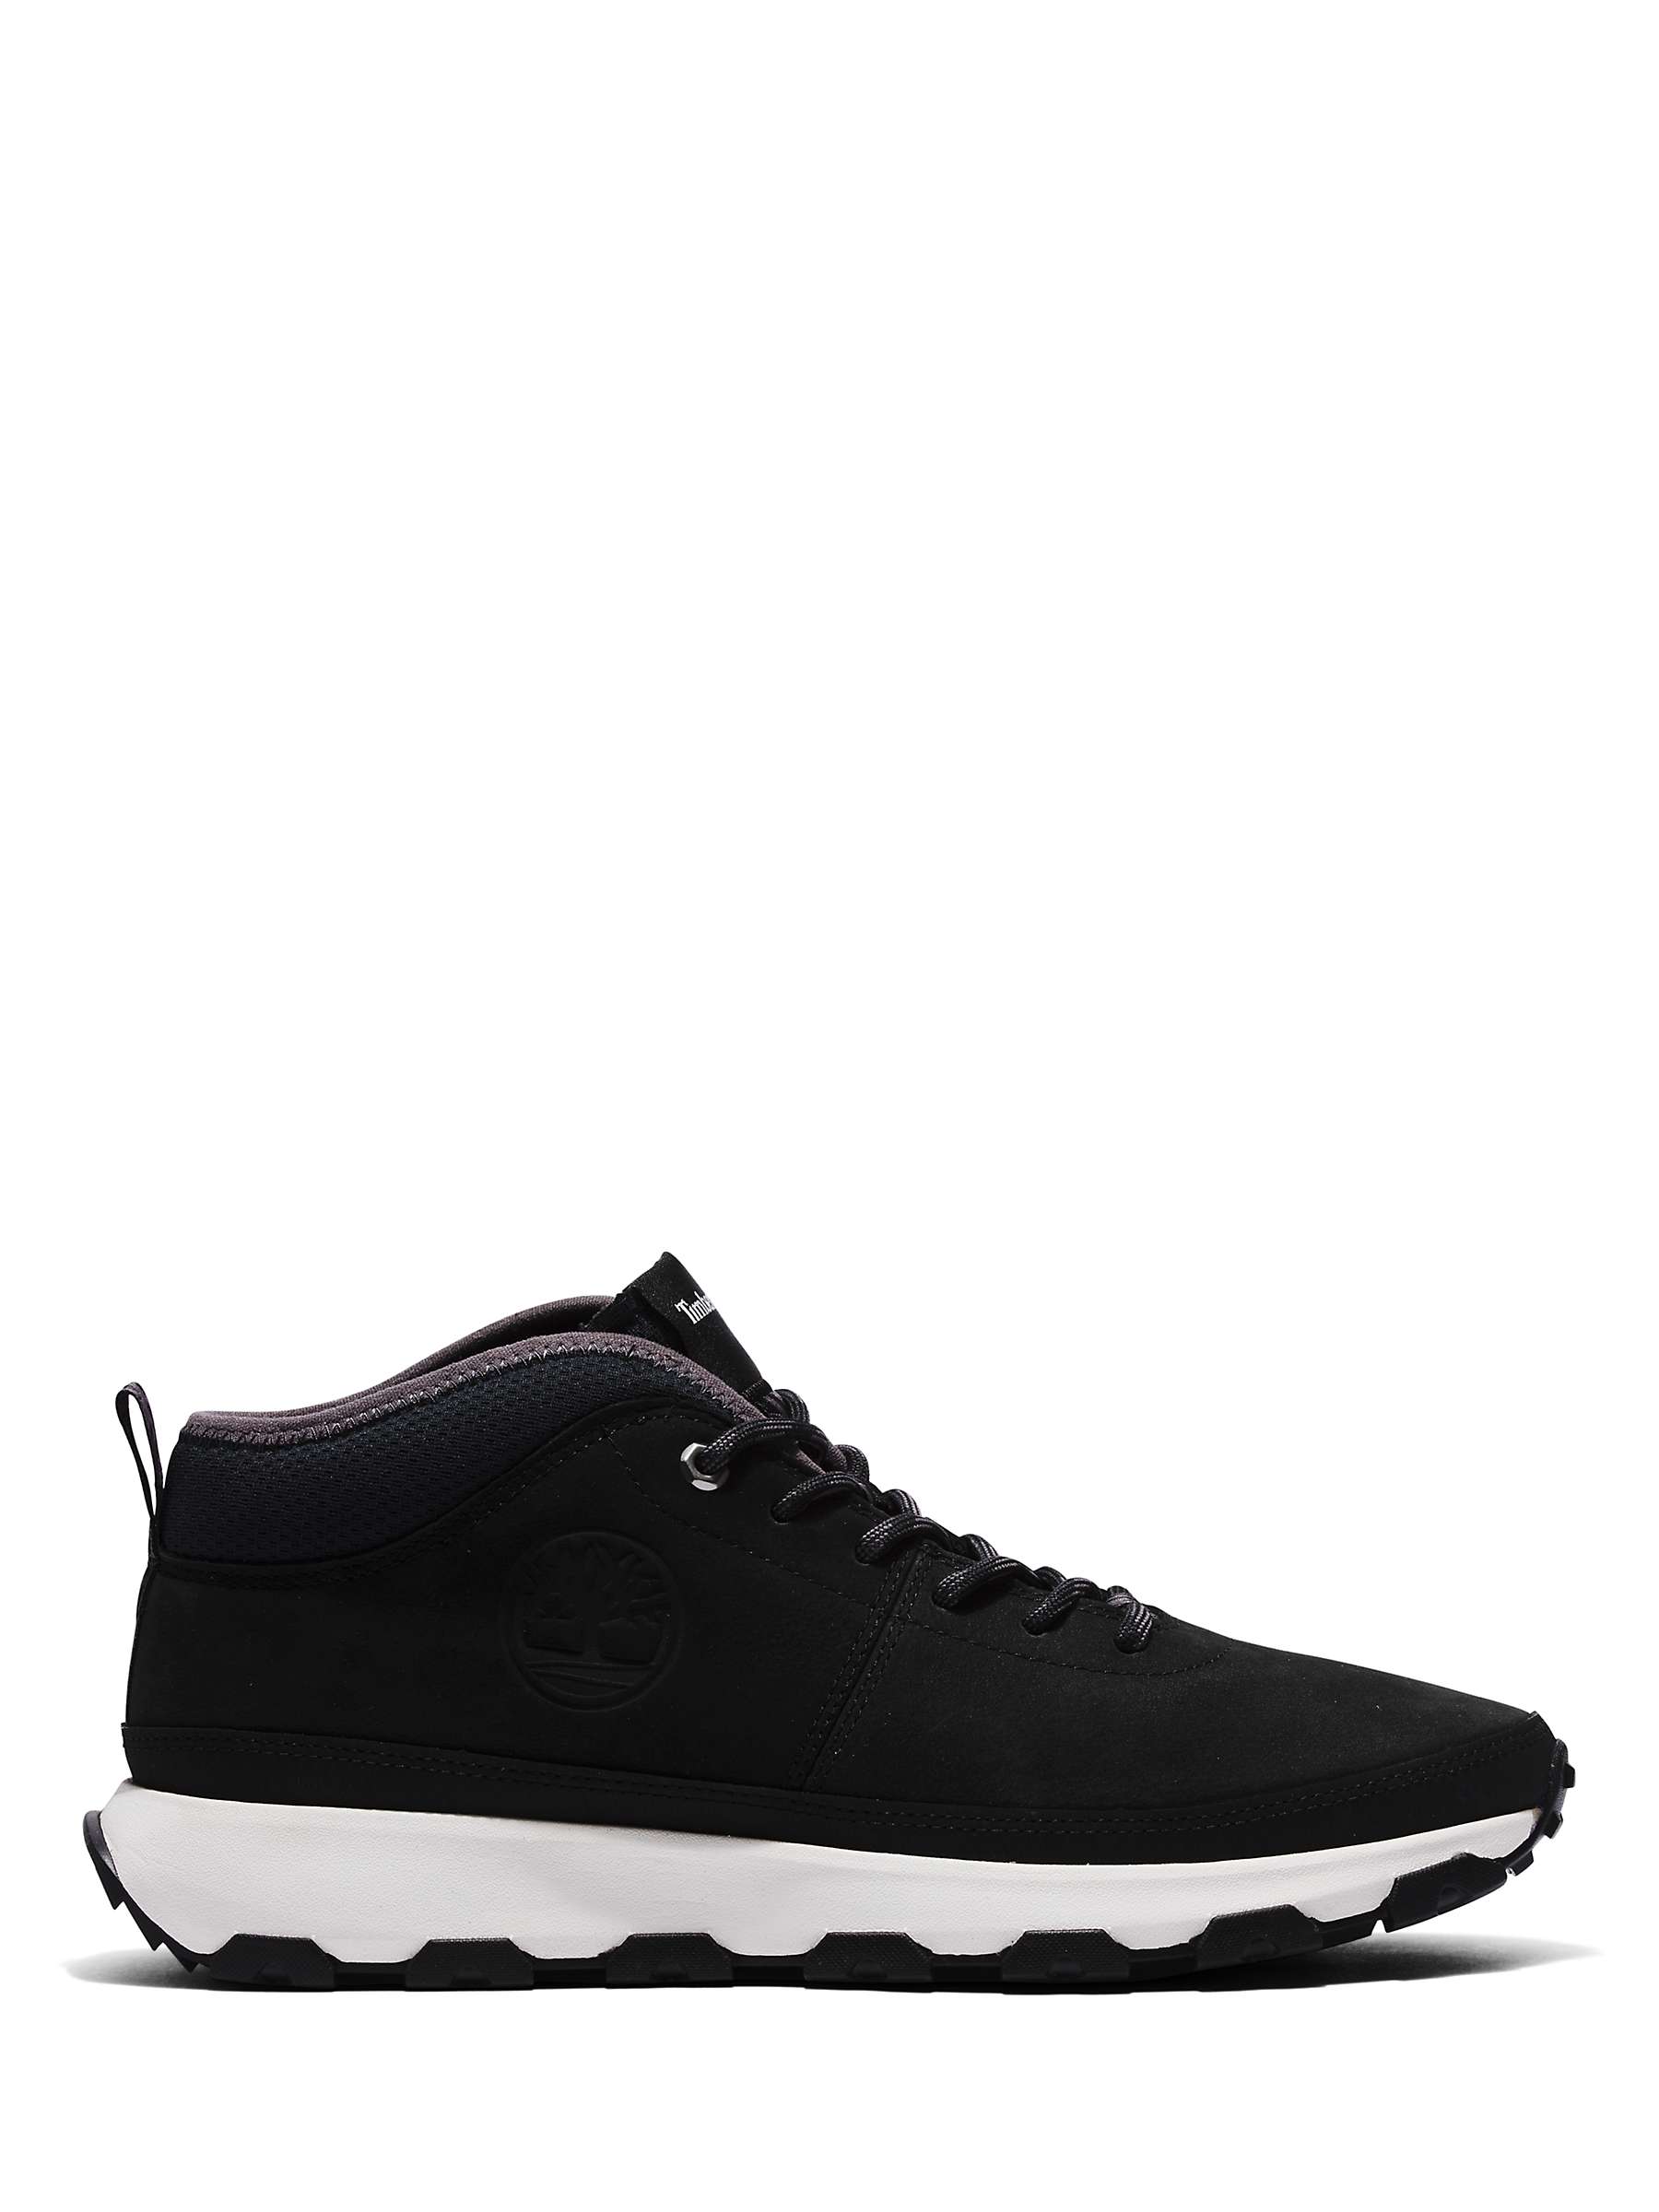 Buy Timberland Winsor Trail Shoes, Black Online at johnlewis.com